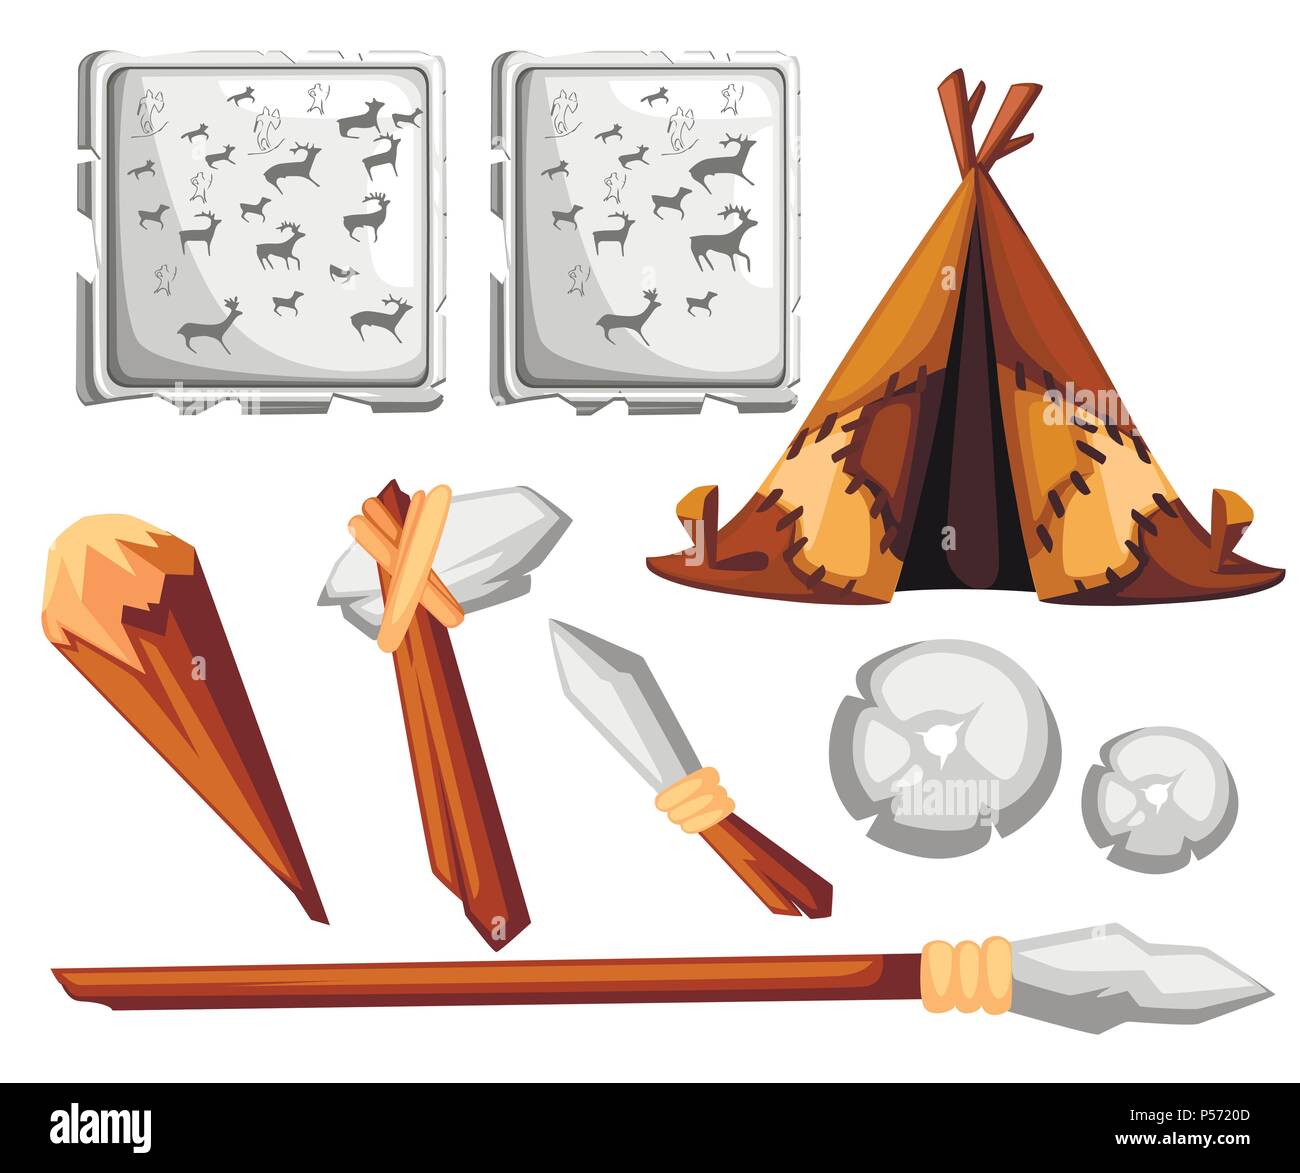 Ancient man hut. Prehistoric house from skins leather. Stone age tools and rock painting. Flat style design. Vector illustration isolated on white bac Stock Vector